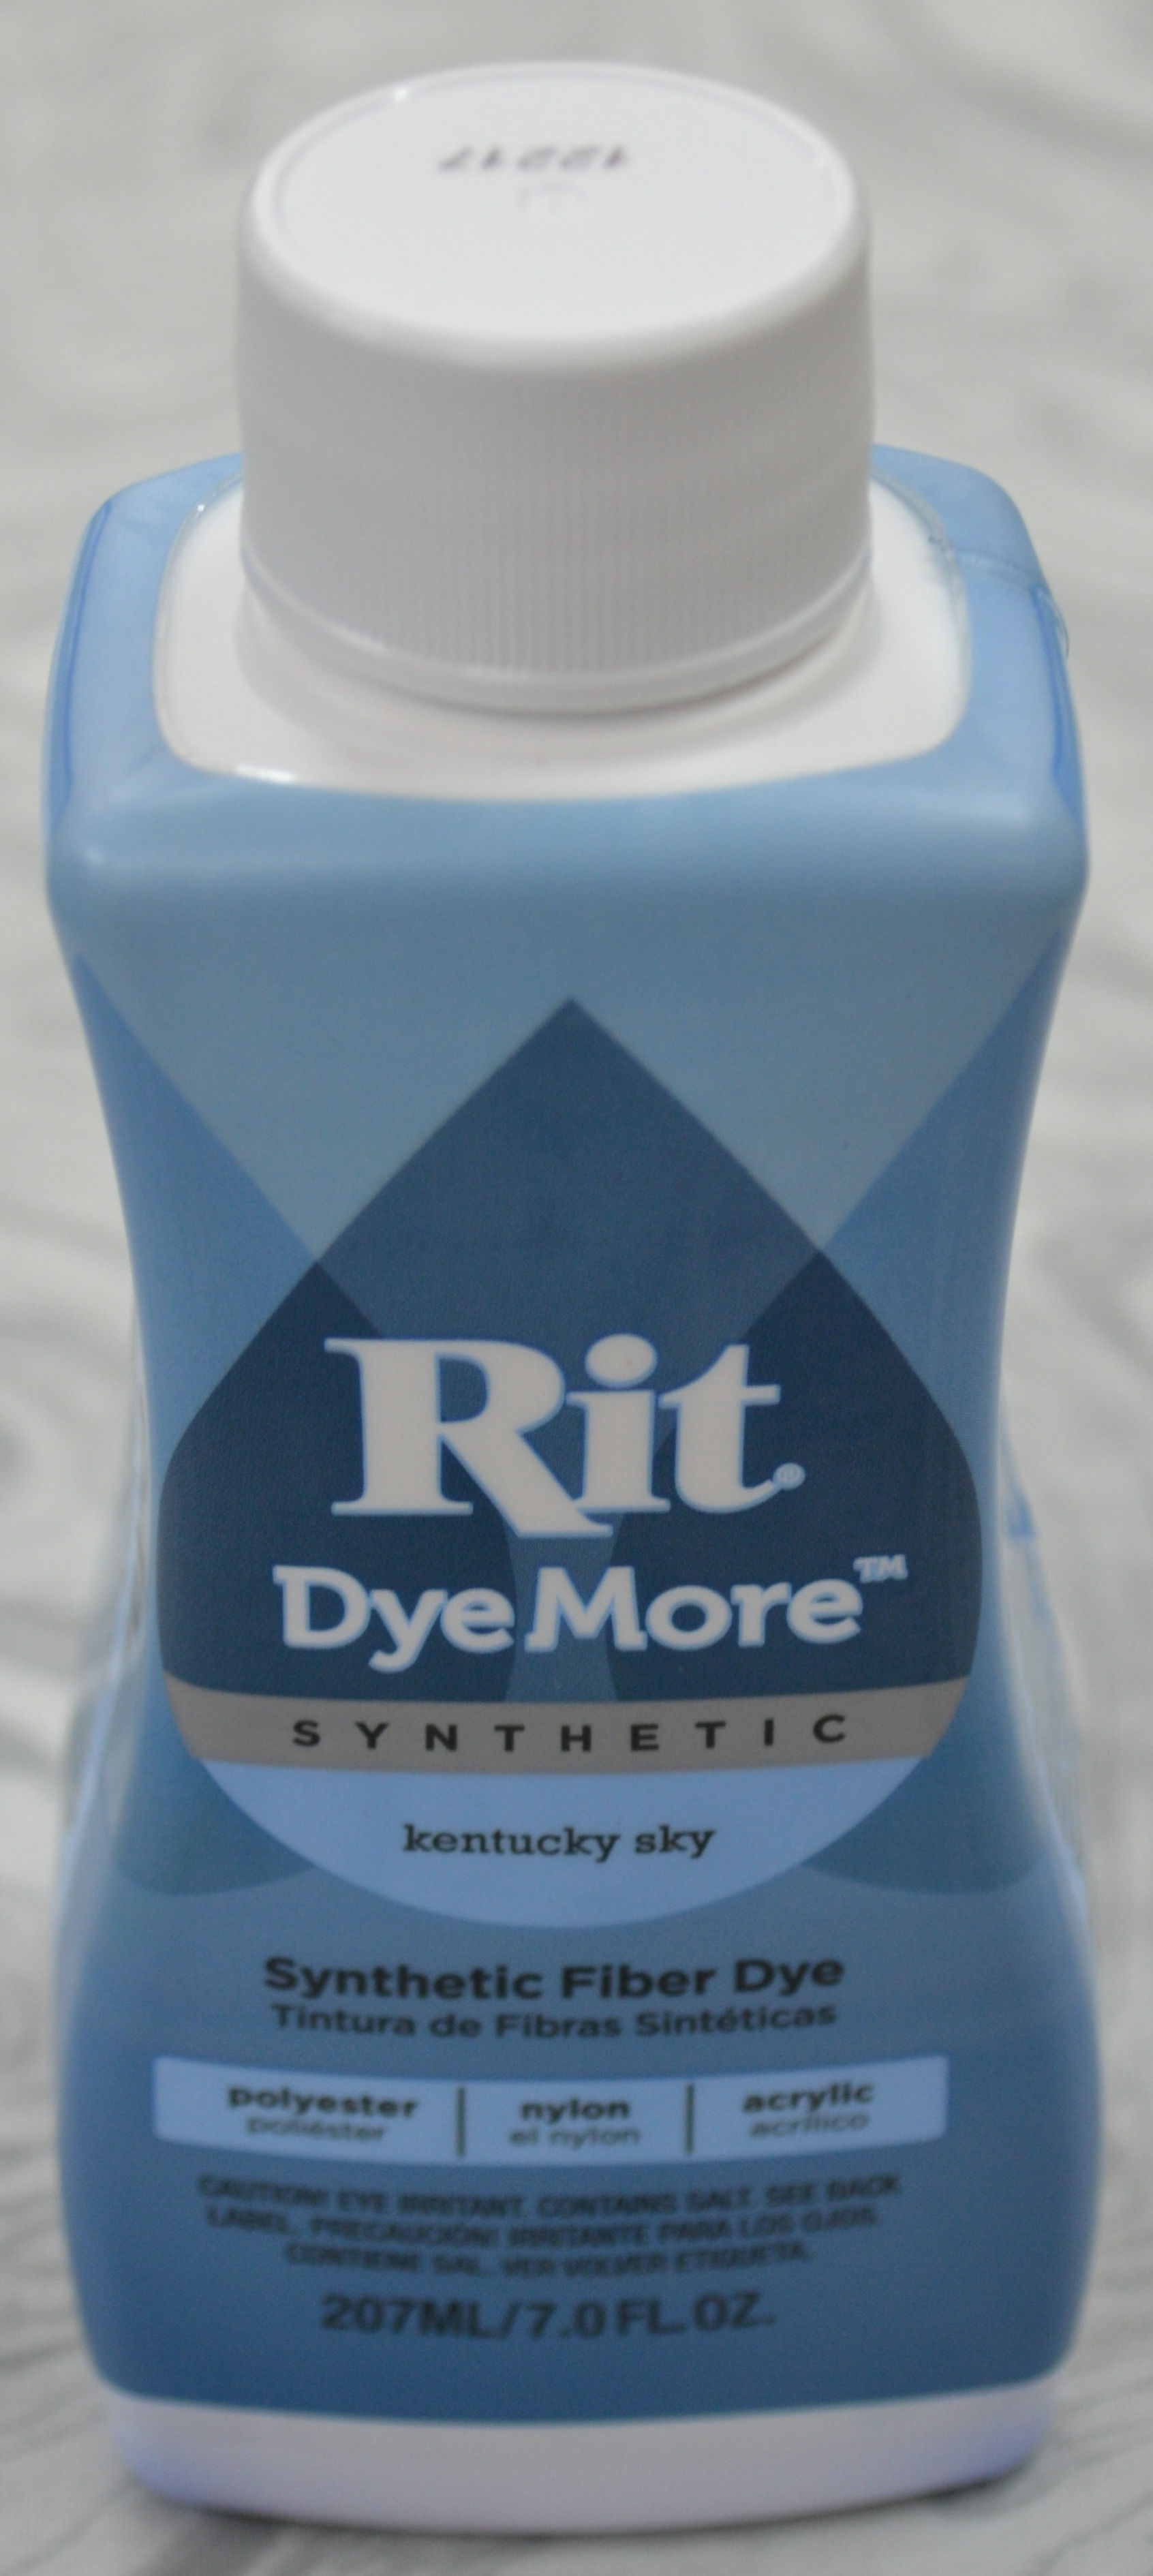 Rit Dyemore for Synthetic Fabrics Fibres Liquid Dye Polyester